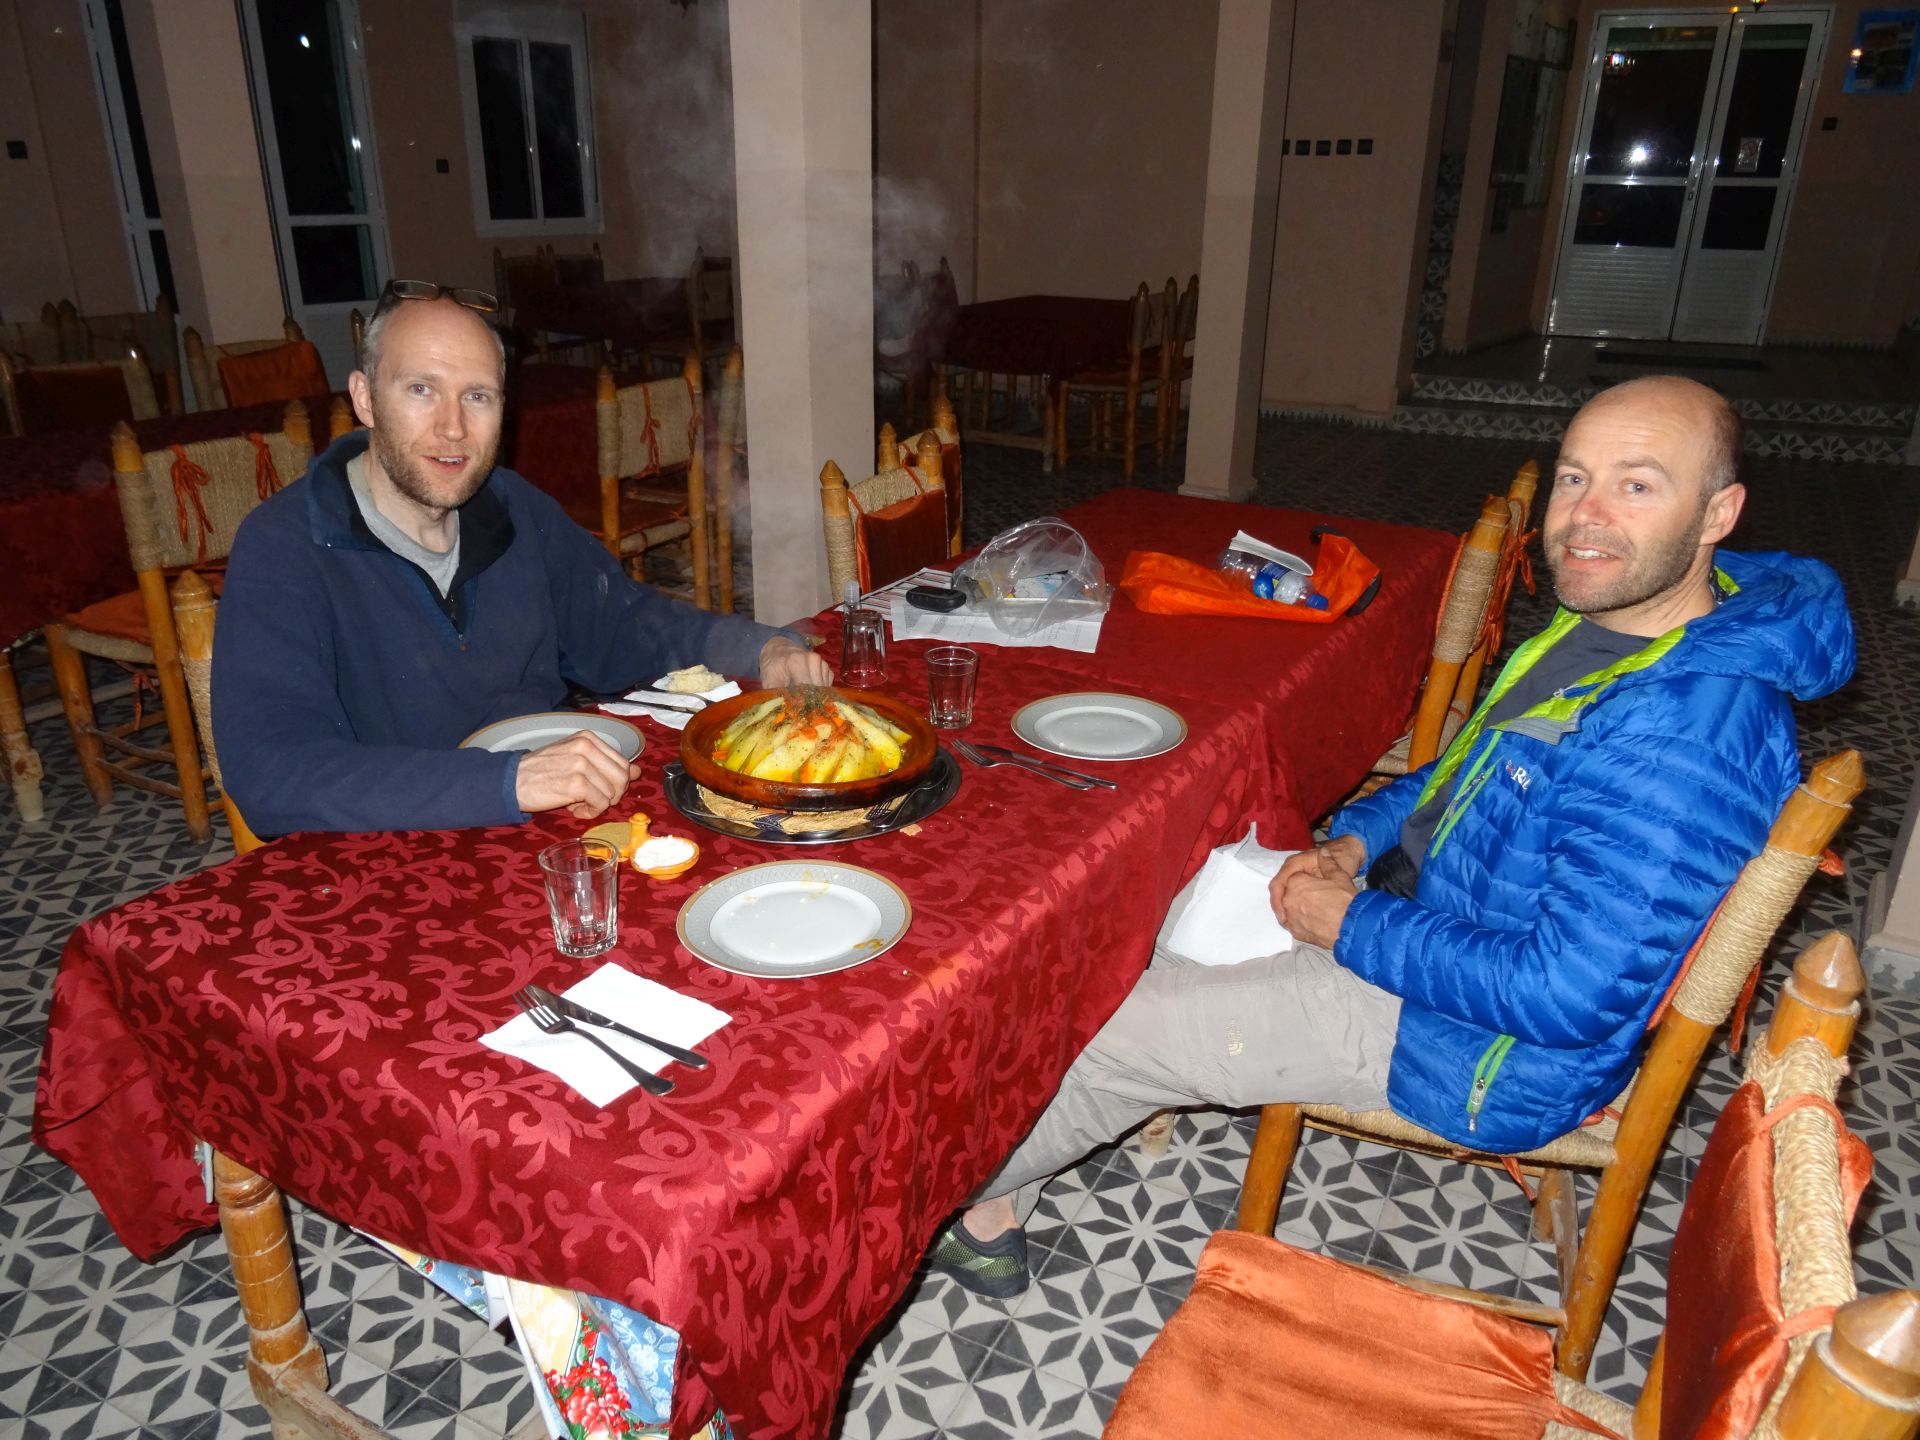 Transfer Day A  - Hungry boys Jon (left) & Shaun (right) ready themselves to inhale Tagine dinner before Steve puts camera down ... Hotel Izlane, Imilchil. © Steve Woodward